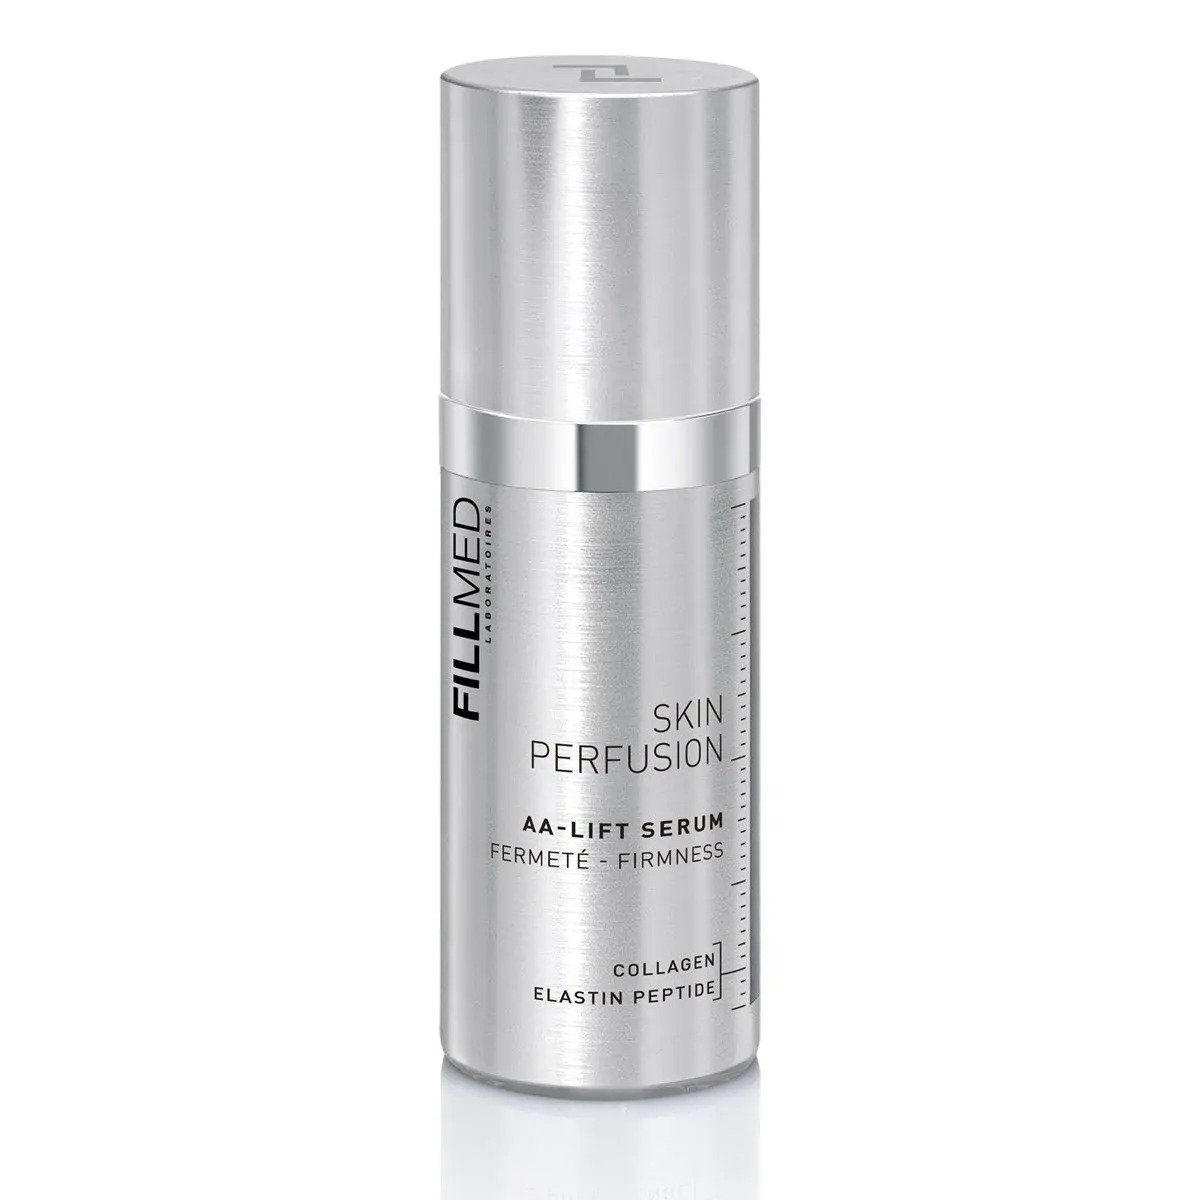 Fillmed Anti-Aging-Creme Fillmed Skin Perfusion AA-Lift Serum, 1-tlg. | Anti-Aging-Cremes